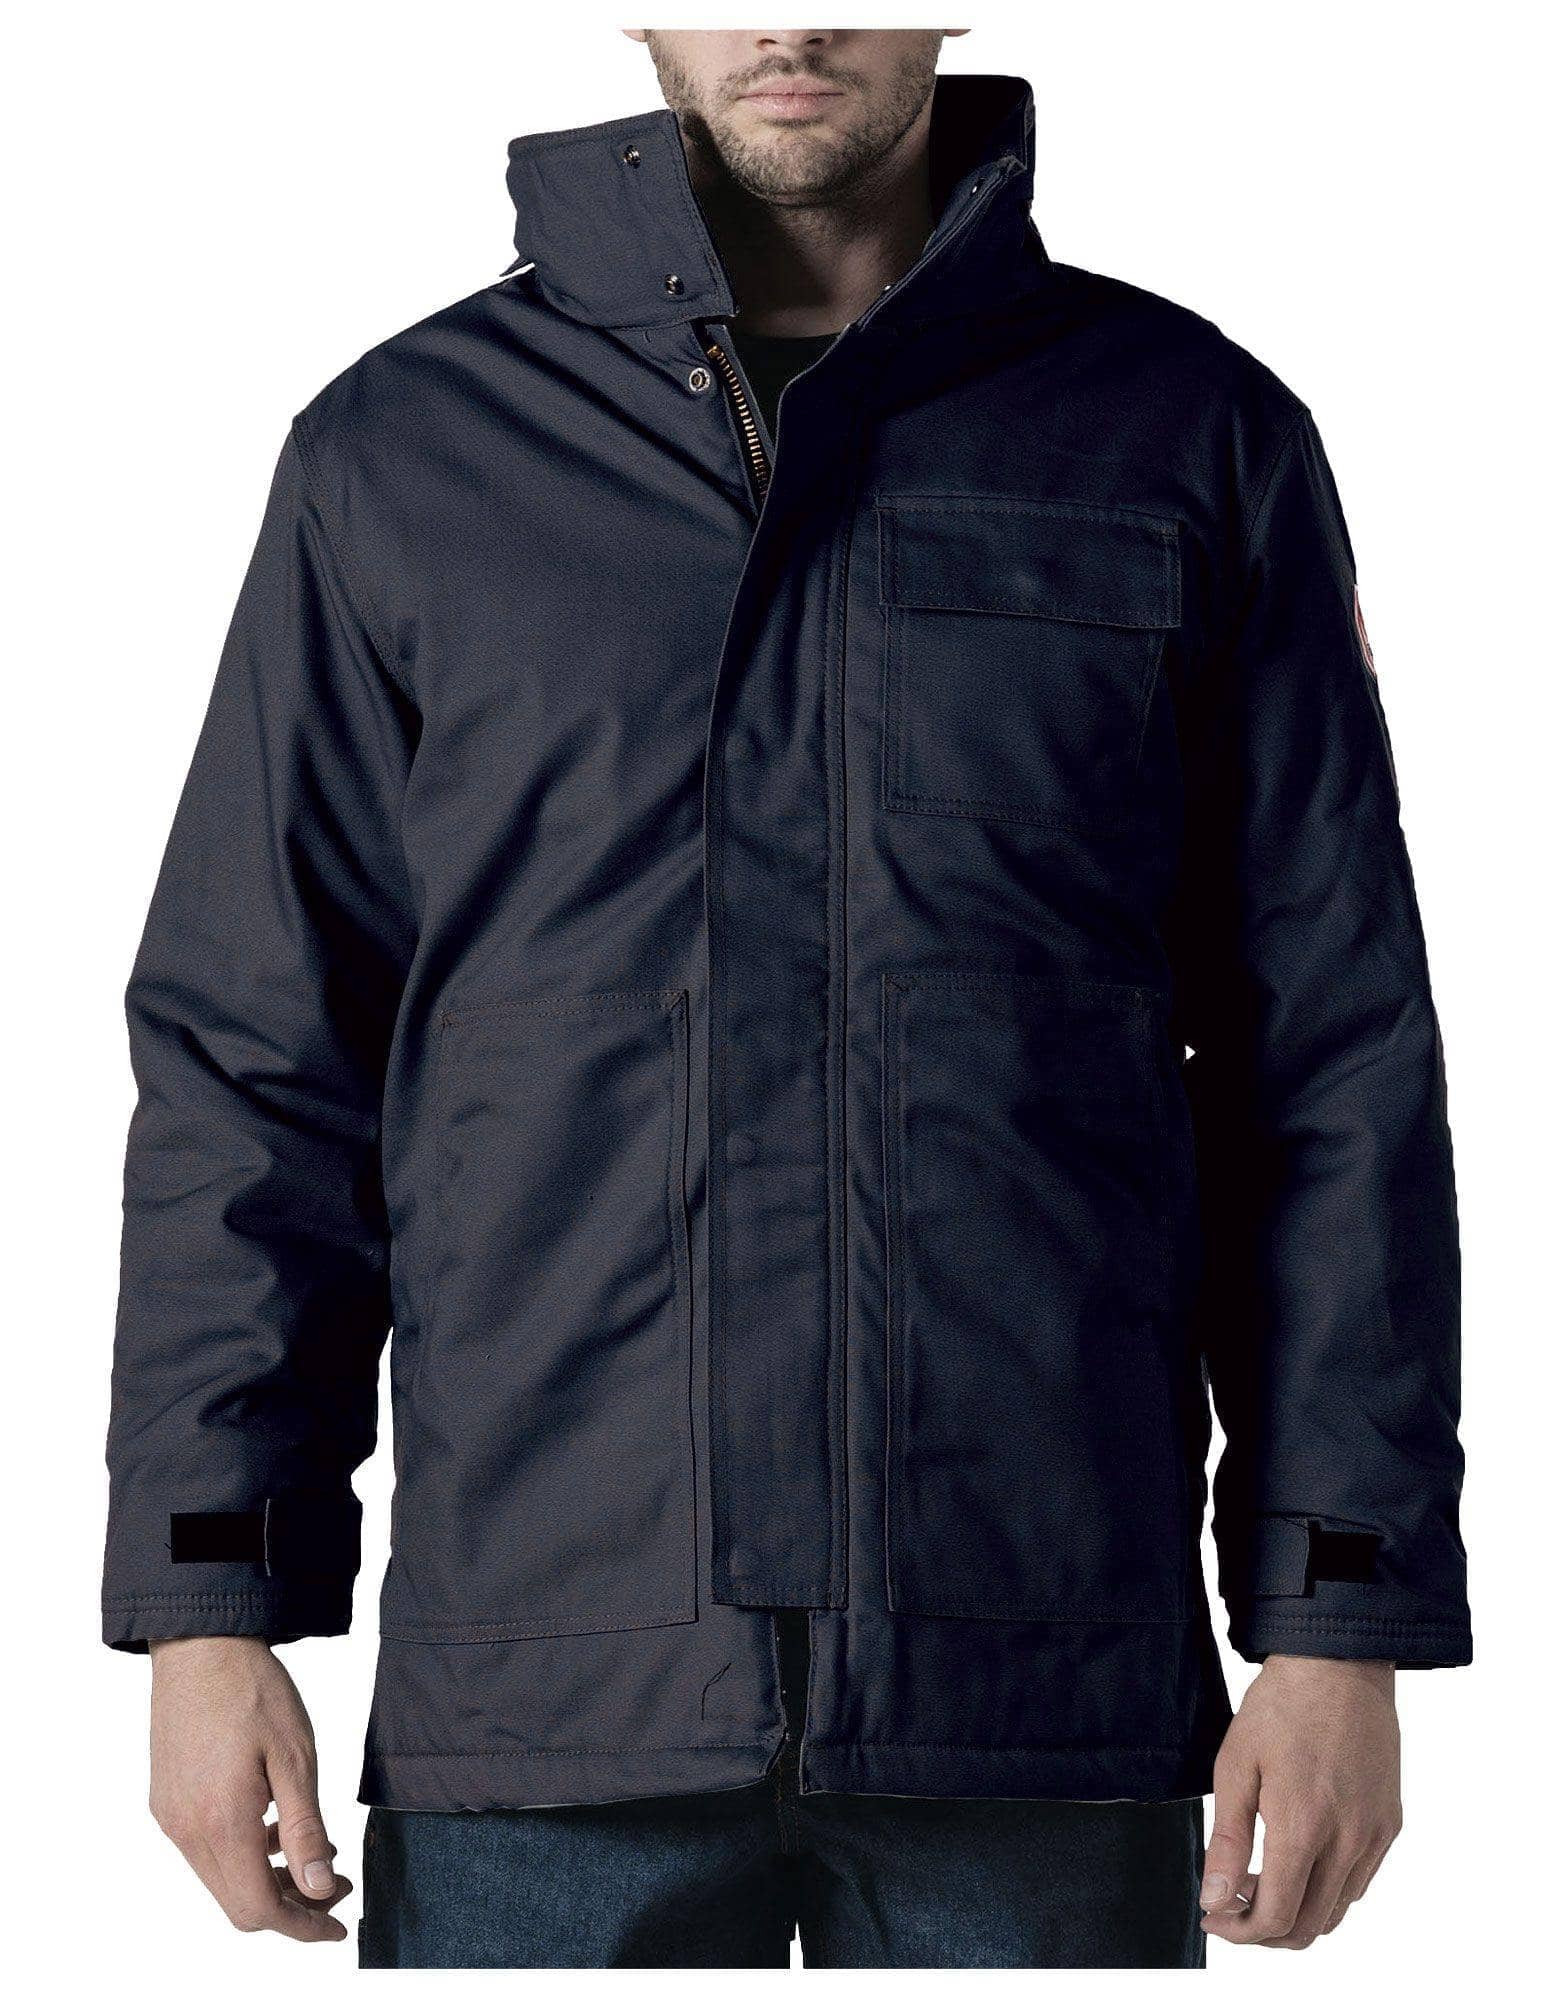 WALLS - FR NAVY Insulated Chore Coat - Becker Safety and Supply